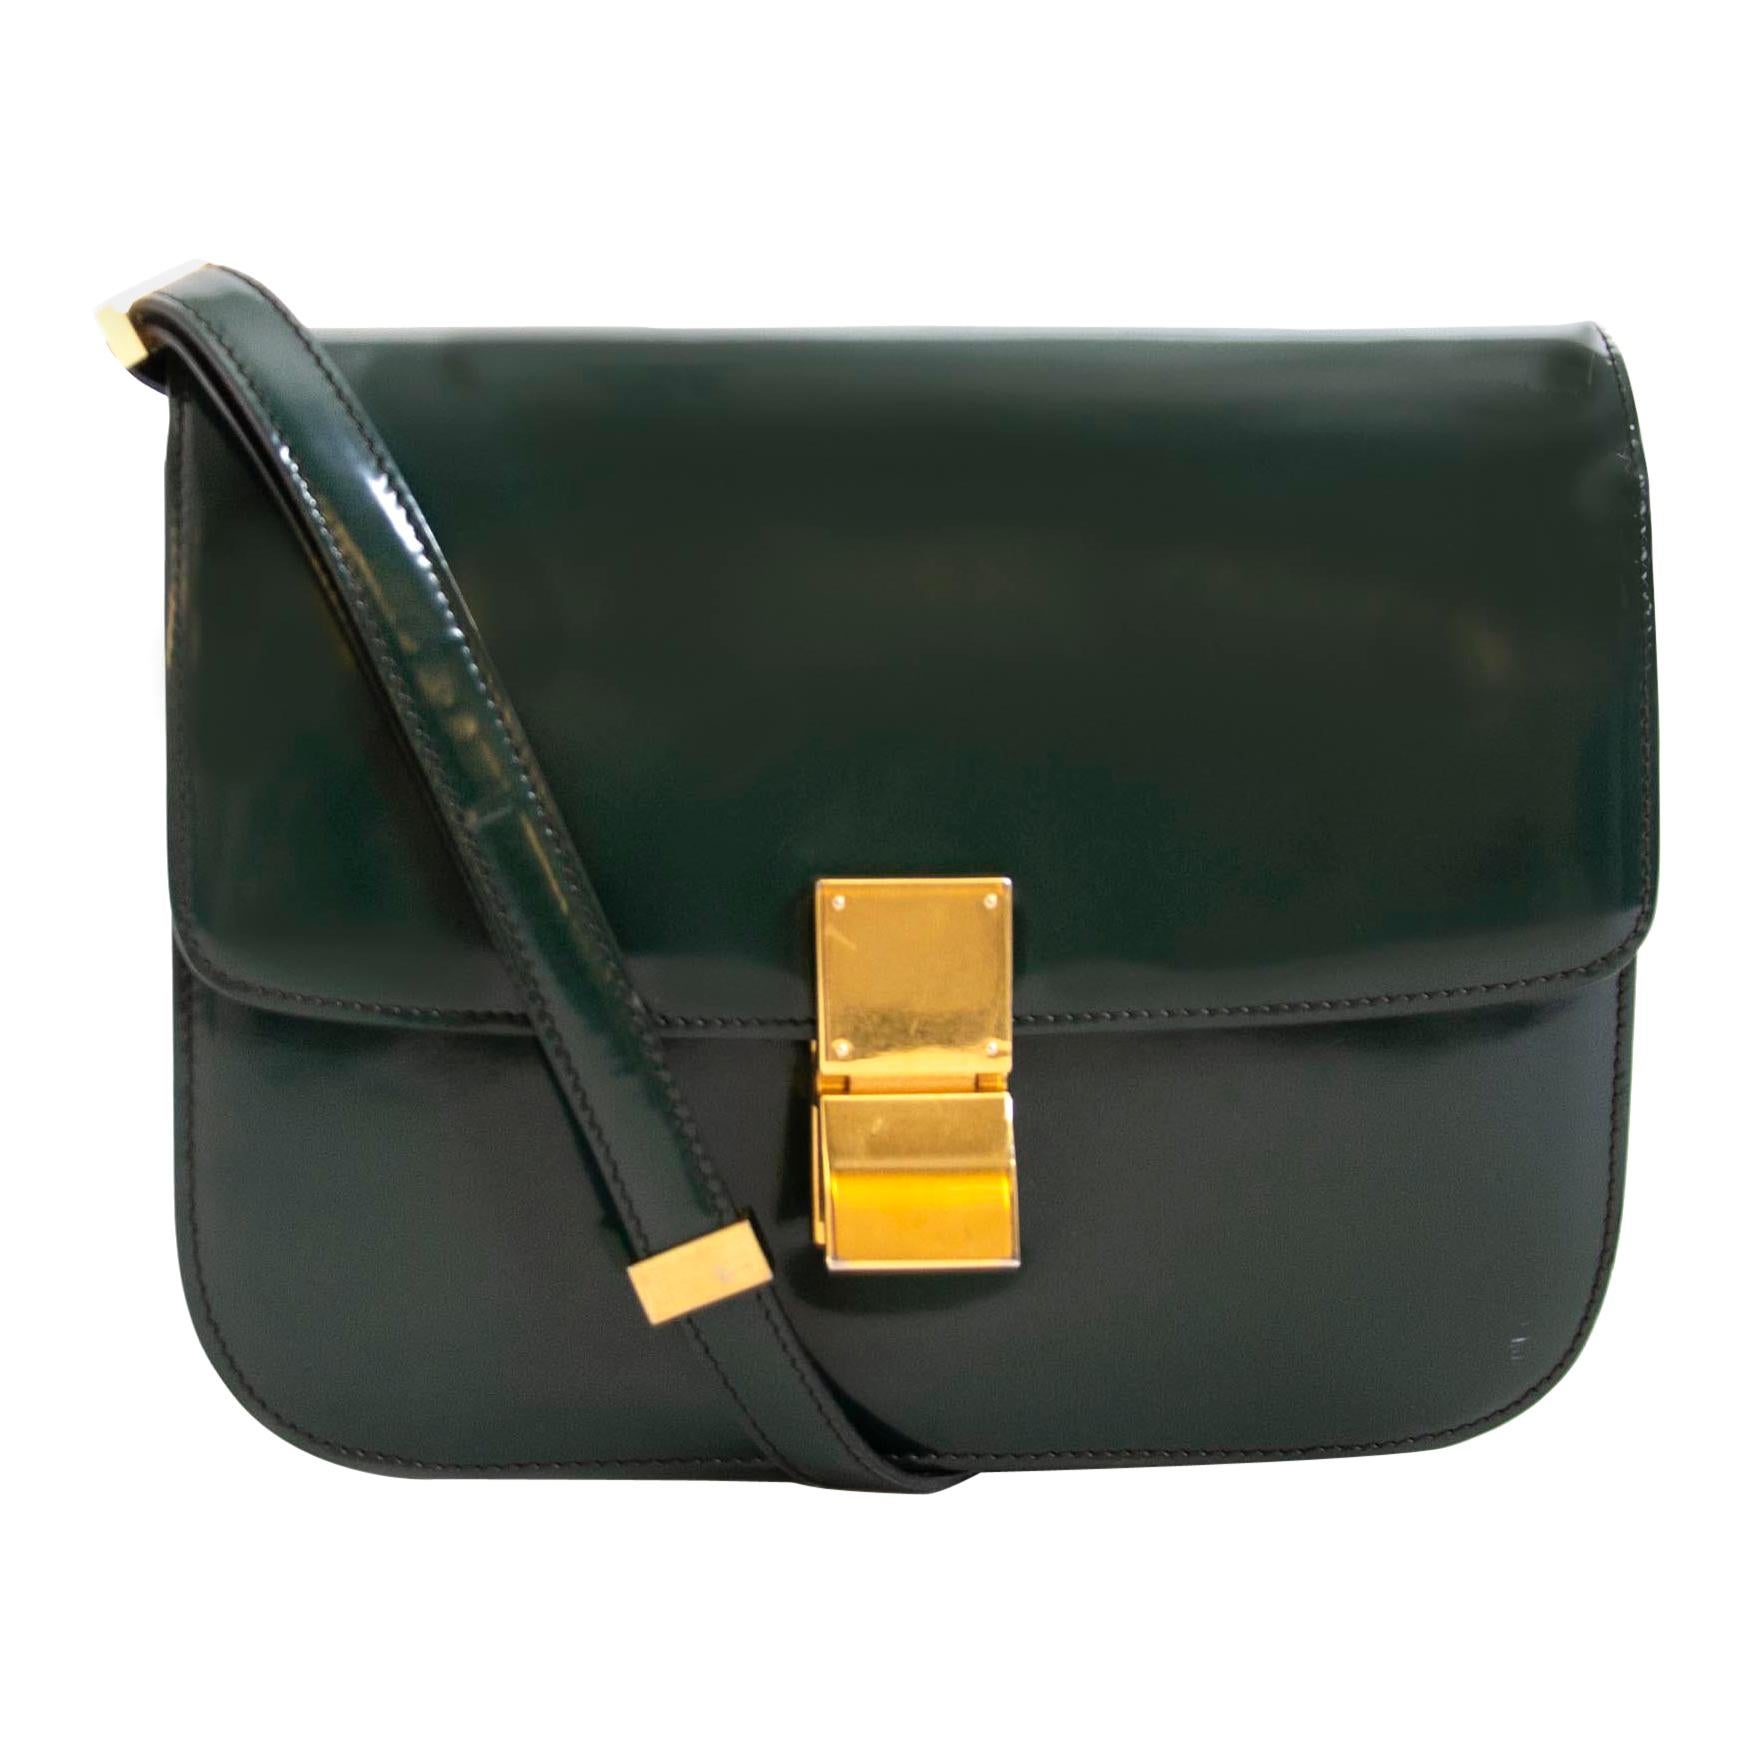 Celine Classic Green Patent Leather Bag